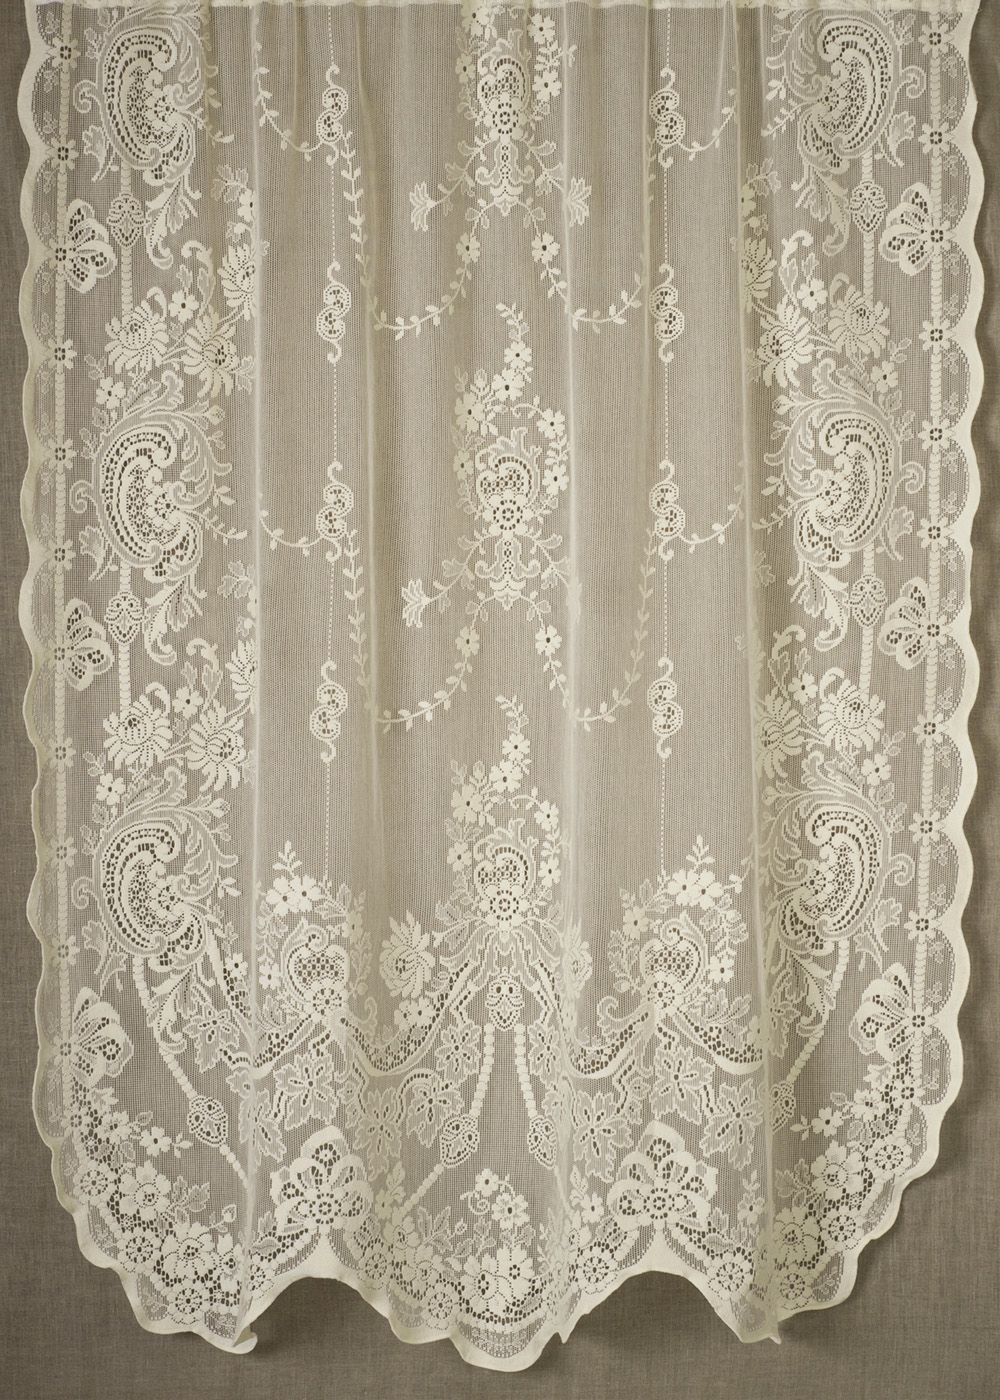 Rachel Nottingham Lace Curtain Direct From London We Specializing In The Finest Scottish And Madras Curtains Products Like